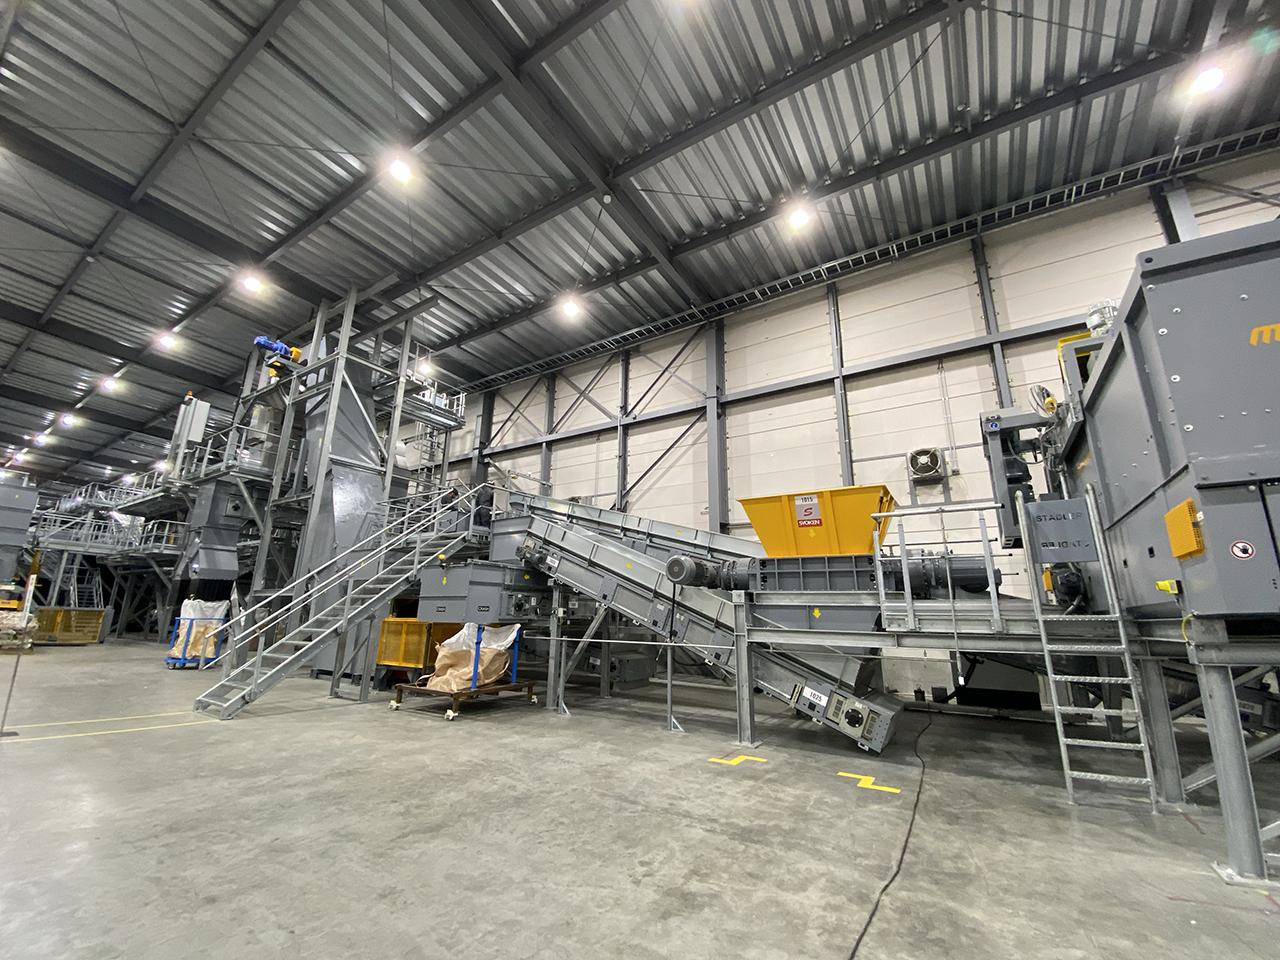 Part of a recycling plant. Equipment for the process of coarsely crushing and sorting collected waste plastics.